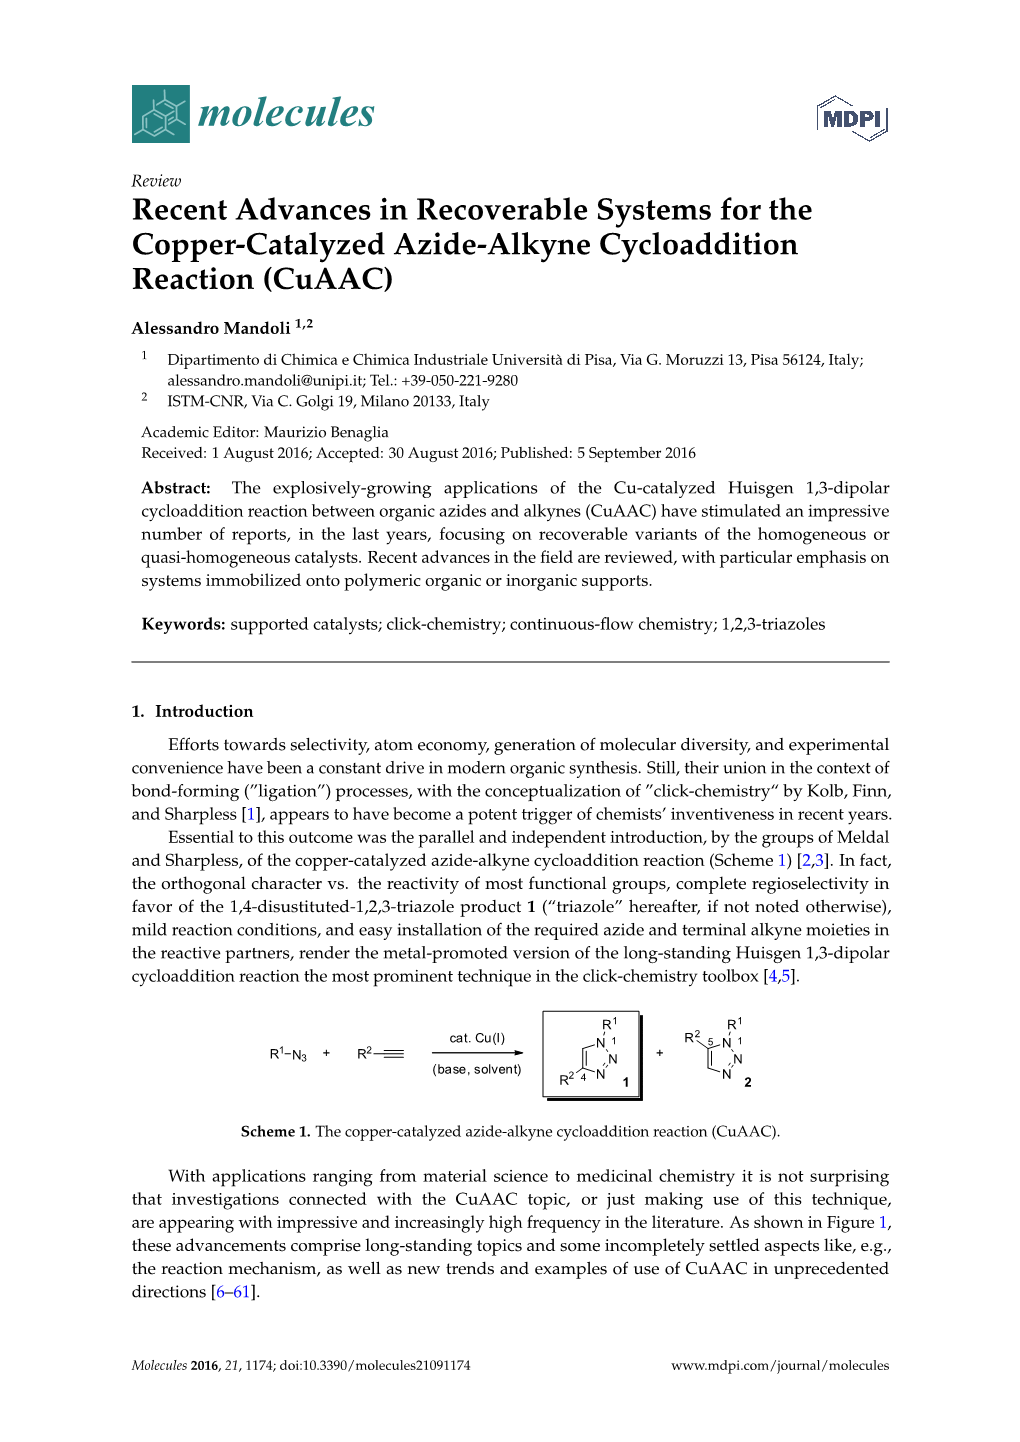 Recent Advances in Recoverable Systems for the Copper